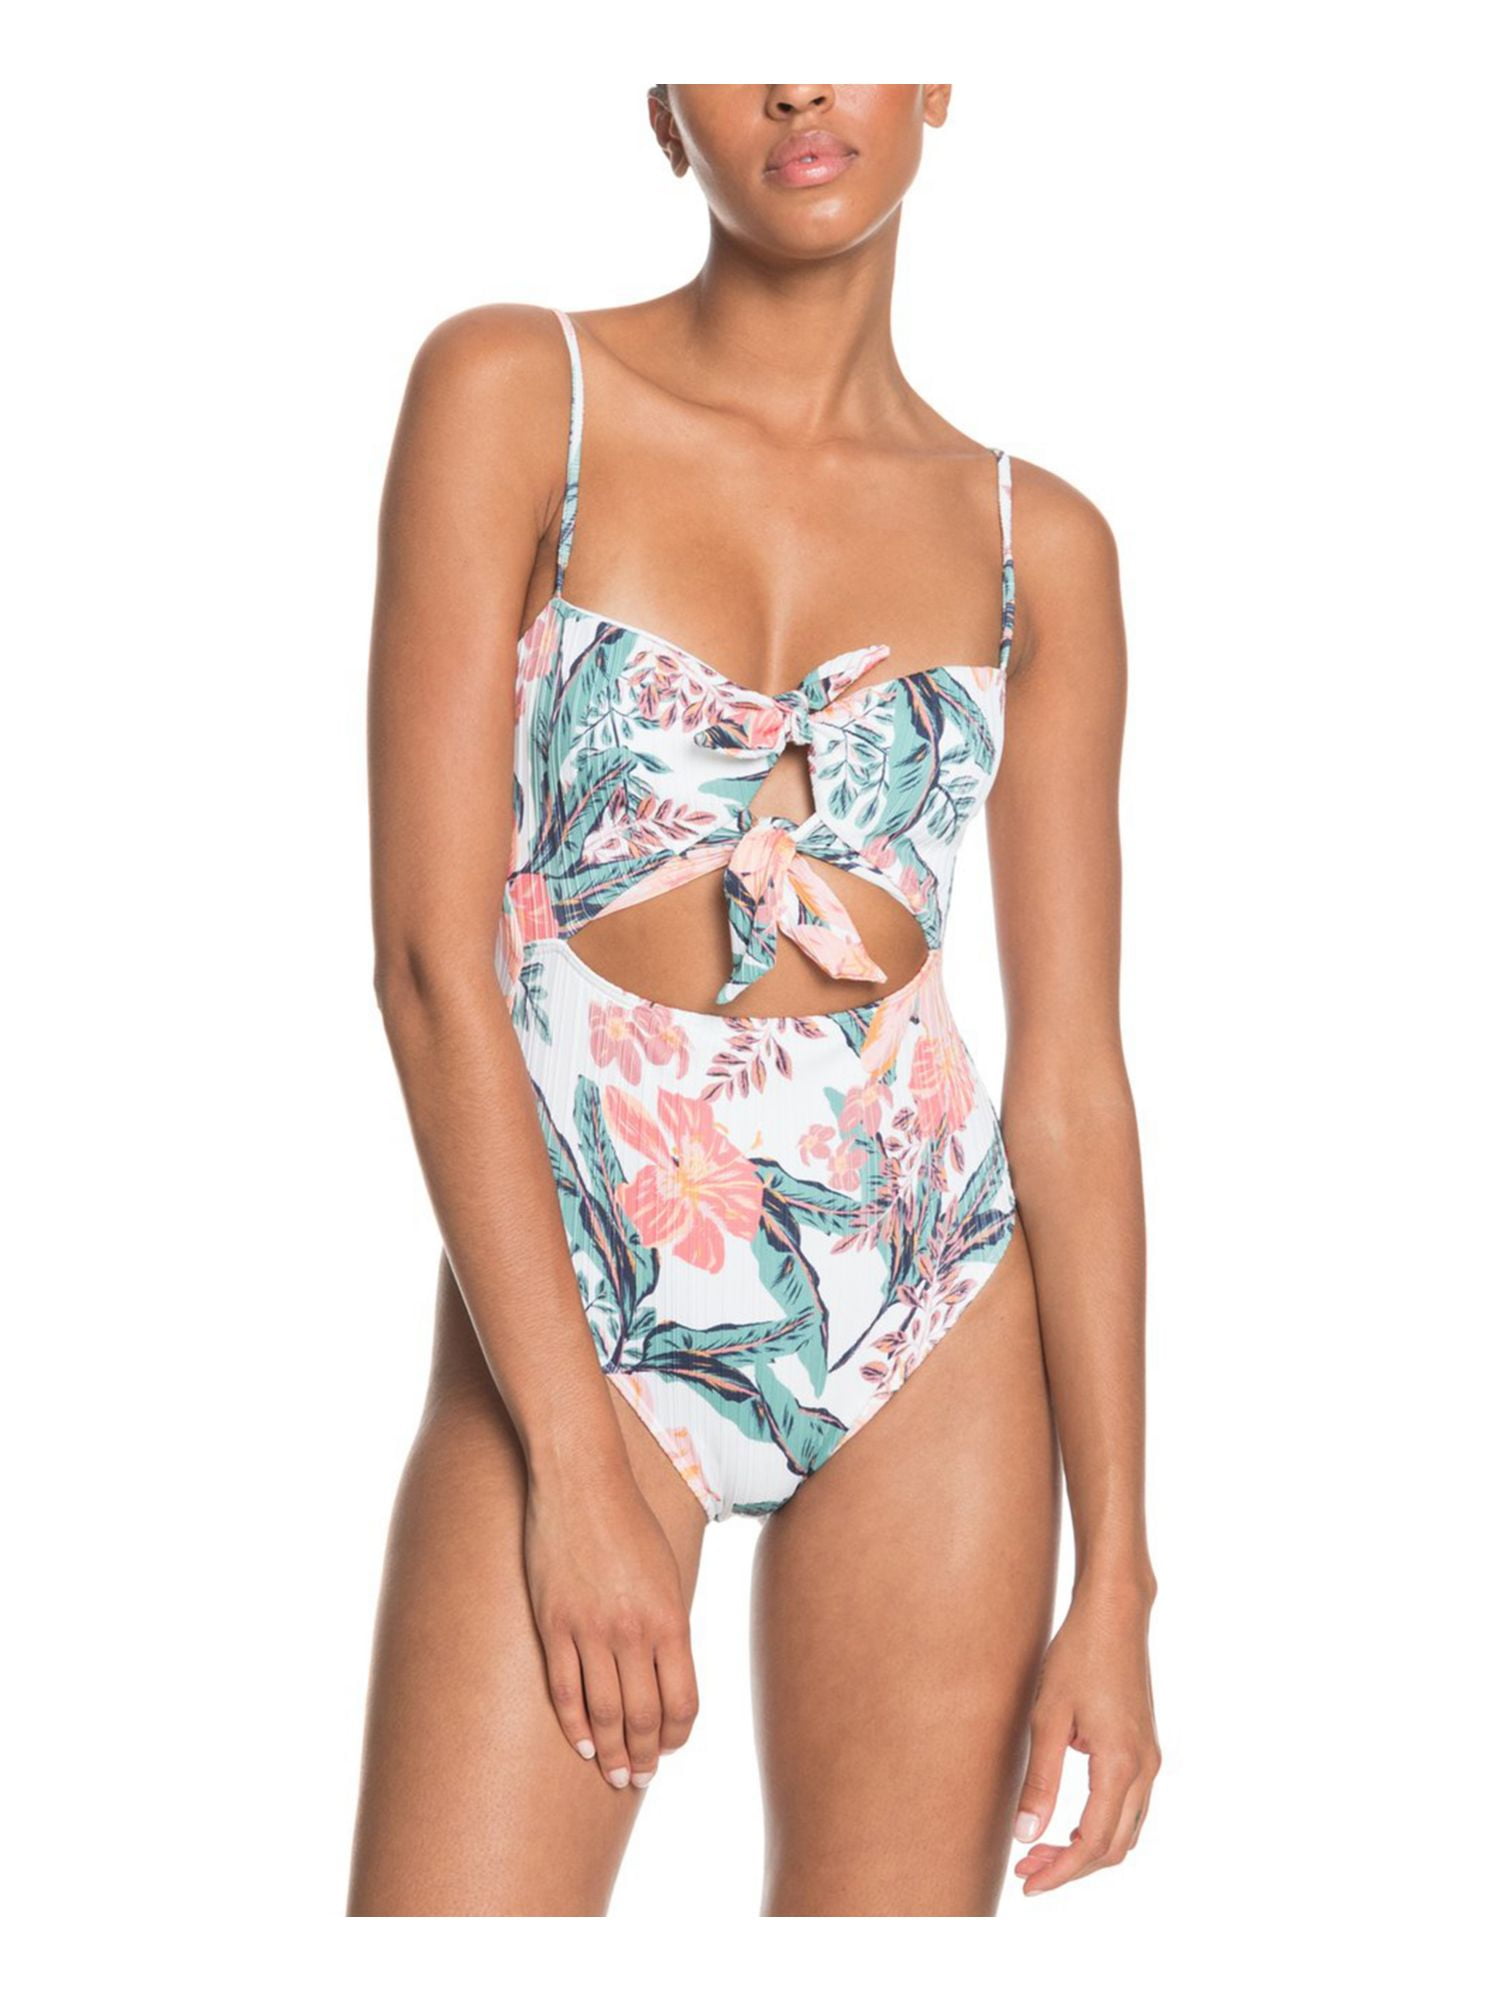 Handel Weekendtas Meer ROXY Women's White Printed Stretch Cutout Adjustable Tie-Front Sweetheart  Moderate Coverage One Piece Swimsuit S - Walmart.com